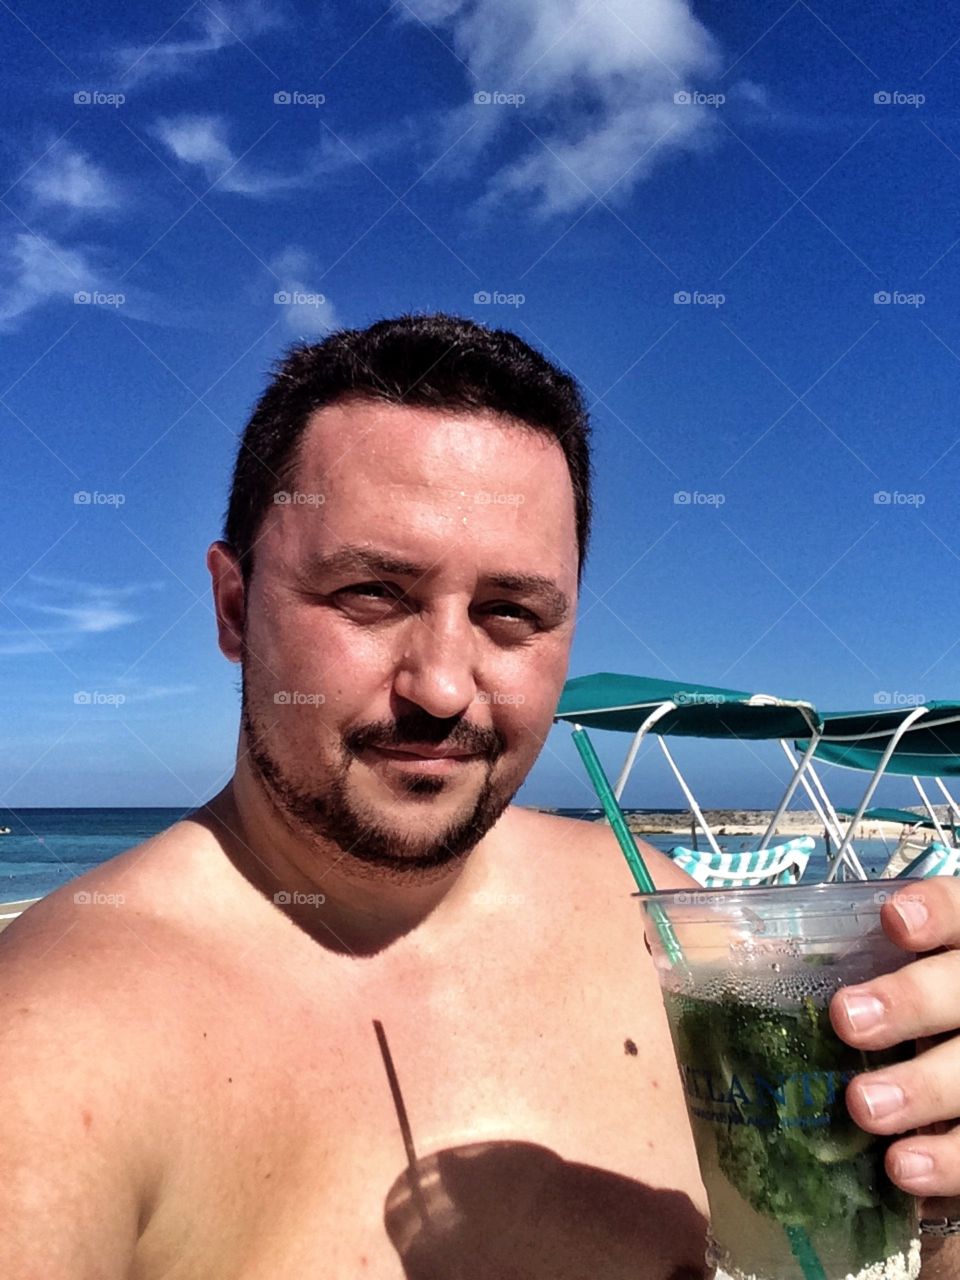 "Cheers from Atlantis"
A fruity beverage 

Me on vacation